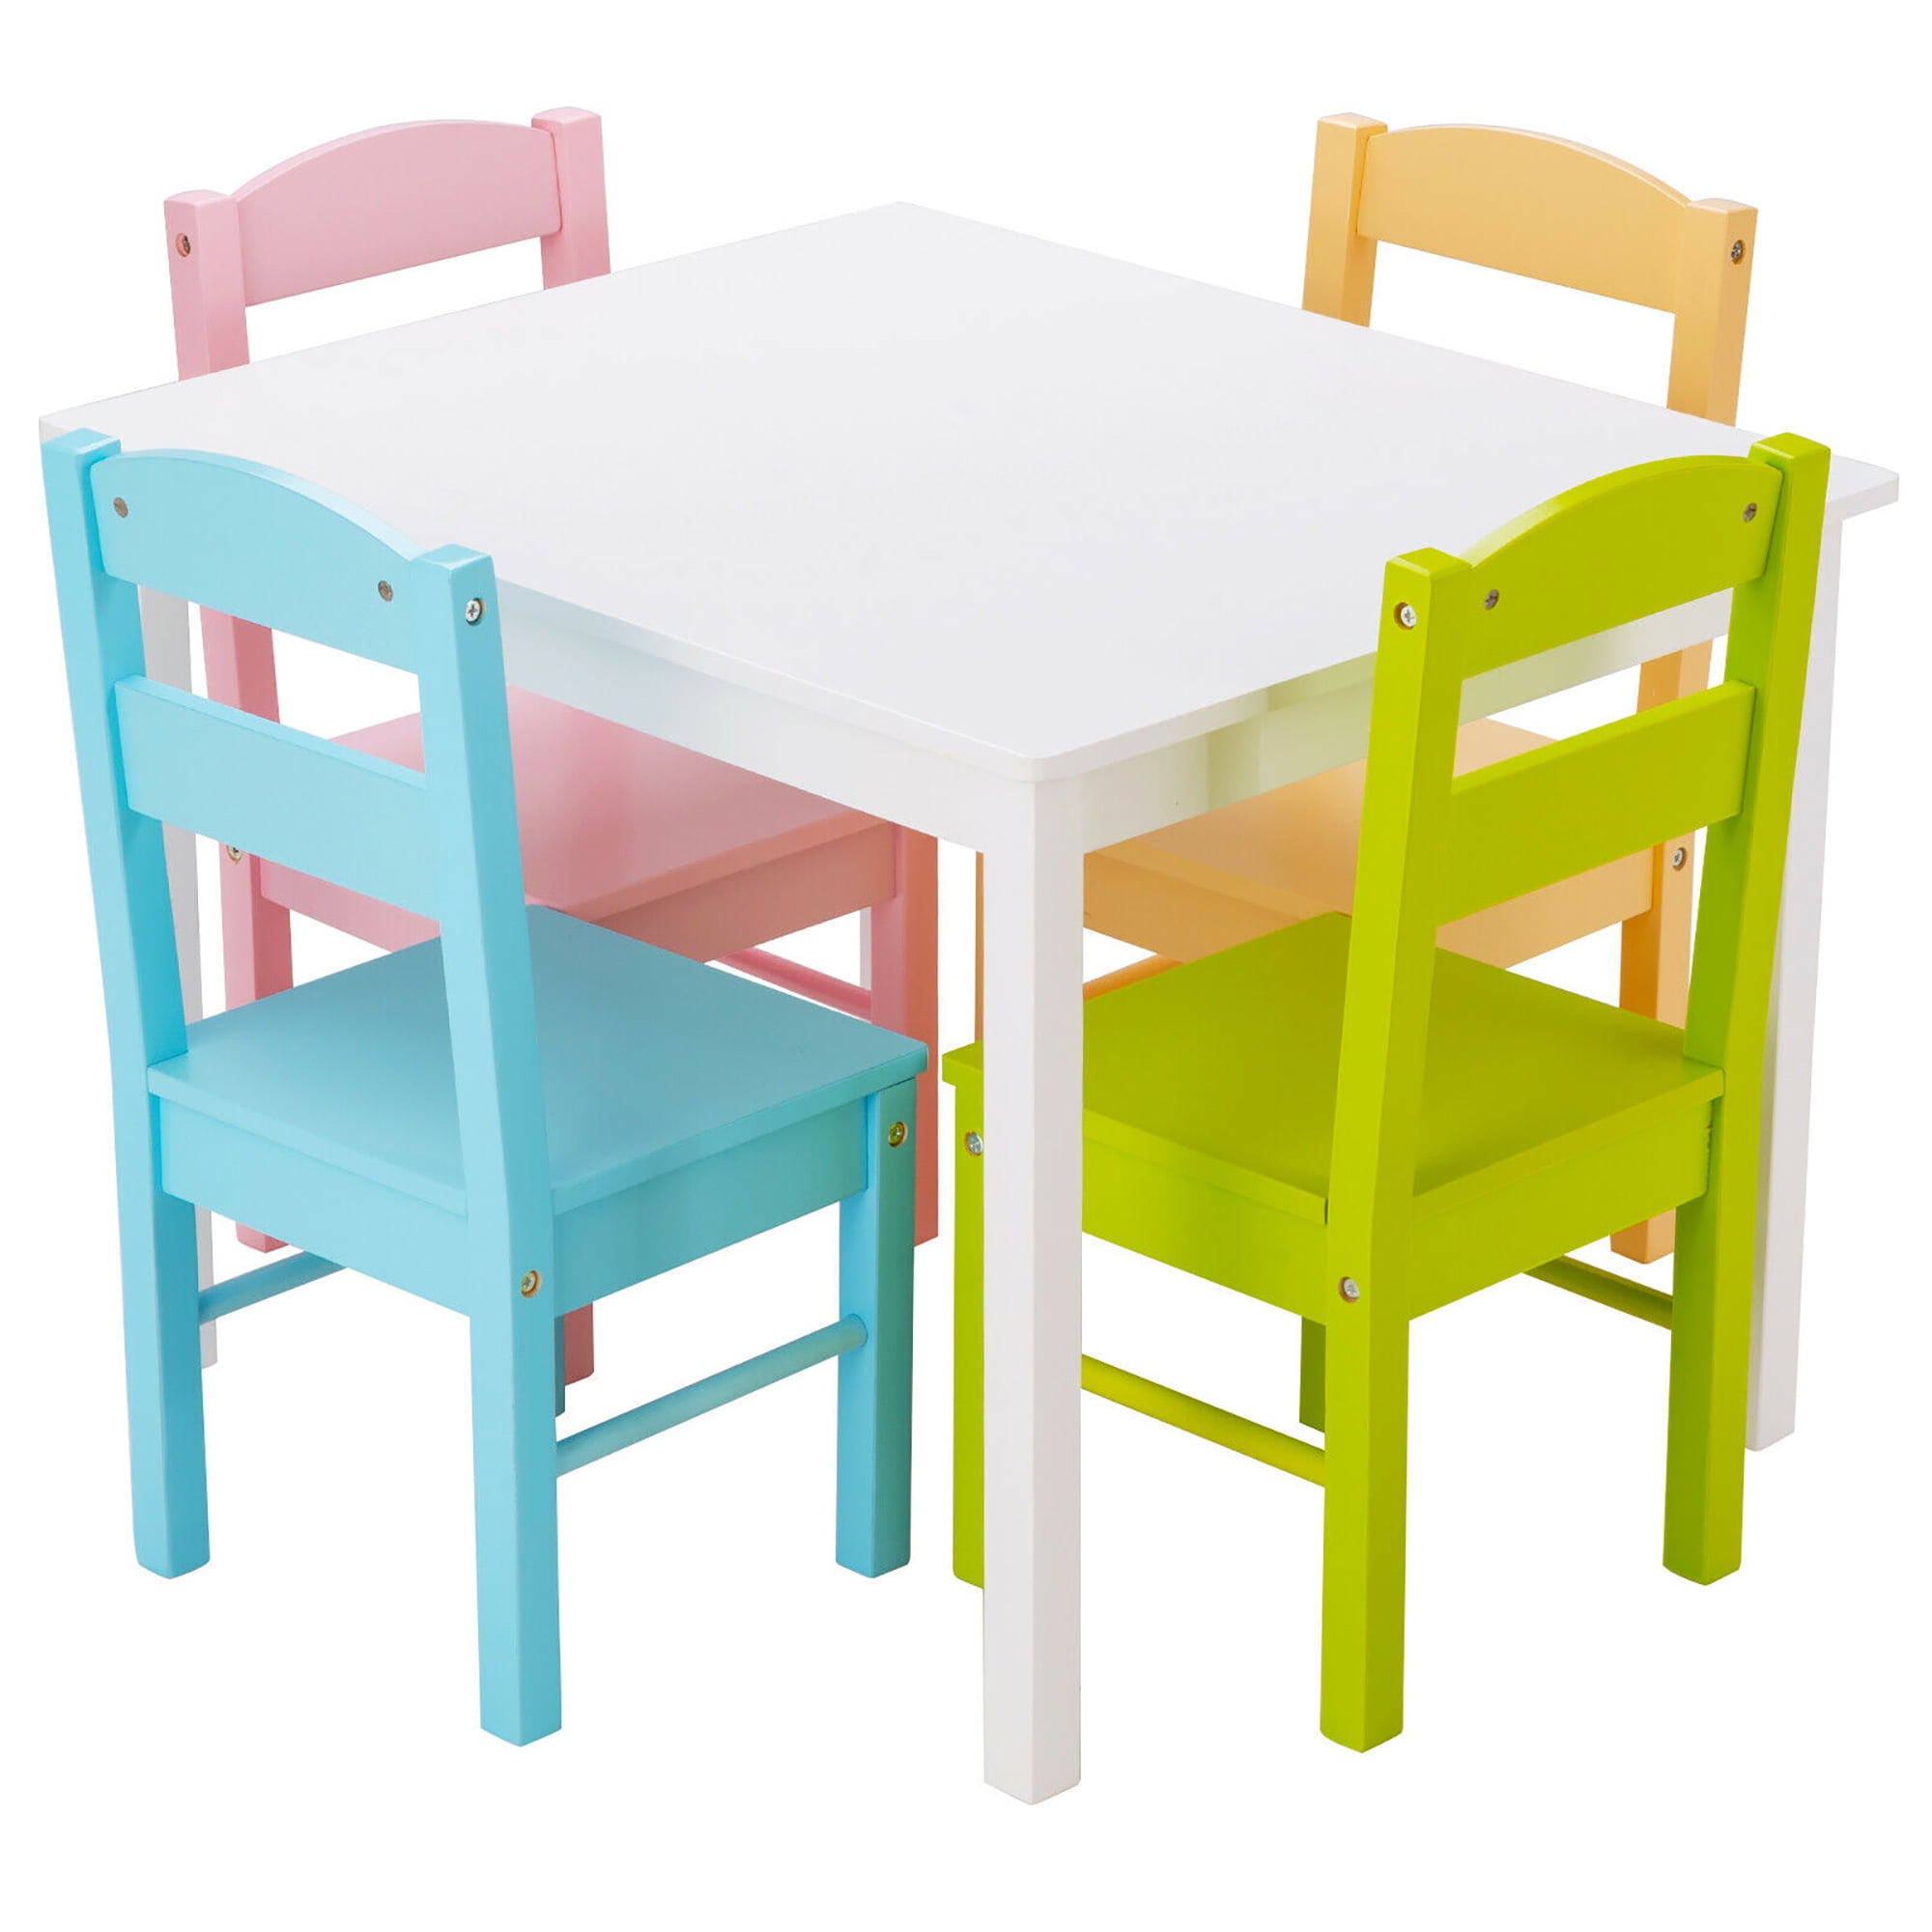 78 x 53 x 53cm Wood Children Table and 2 Chairs for Reading Pink Crafts Arts COSTWAY Kids Table and Chair Set Snack Time Homework 